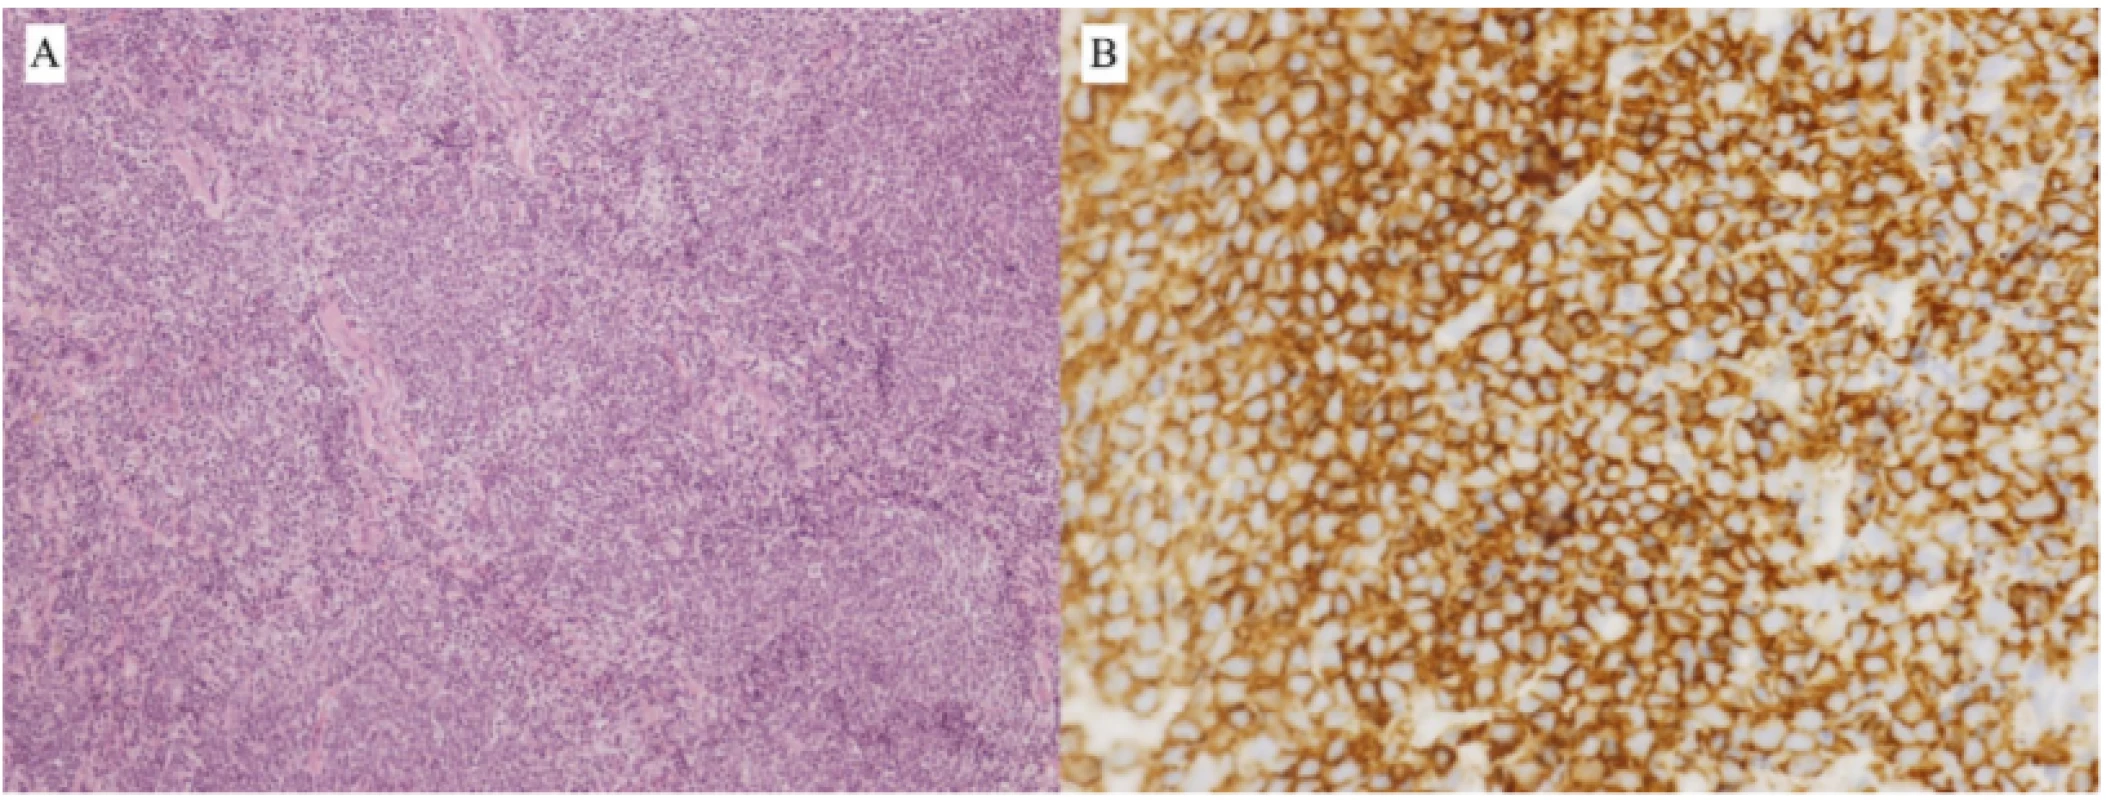 Fig. 3. Patient 1 – B-NHL type MCL, biopsy finding:<br>
A) Infiltration of soft tissues by dense, pseudonodular growing tumorous lymphoproliferation from<br>
small to medium-sized lymphoid cells (HE, enlargement 100x)<br>
B) Immunohistochemical positivity of CD20+ marker in tumour cells (enlargement 400x)